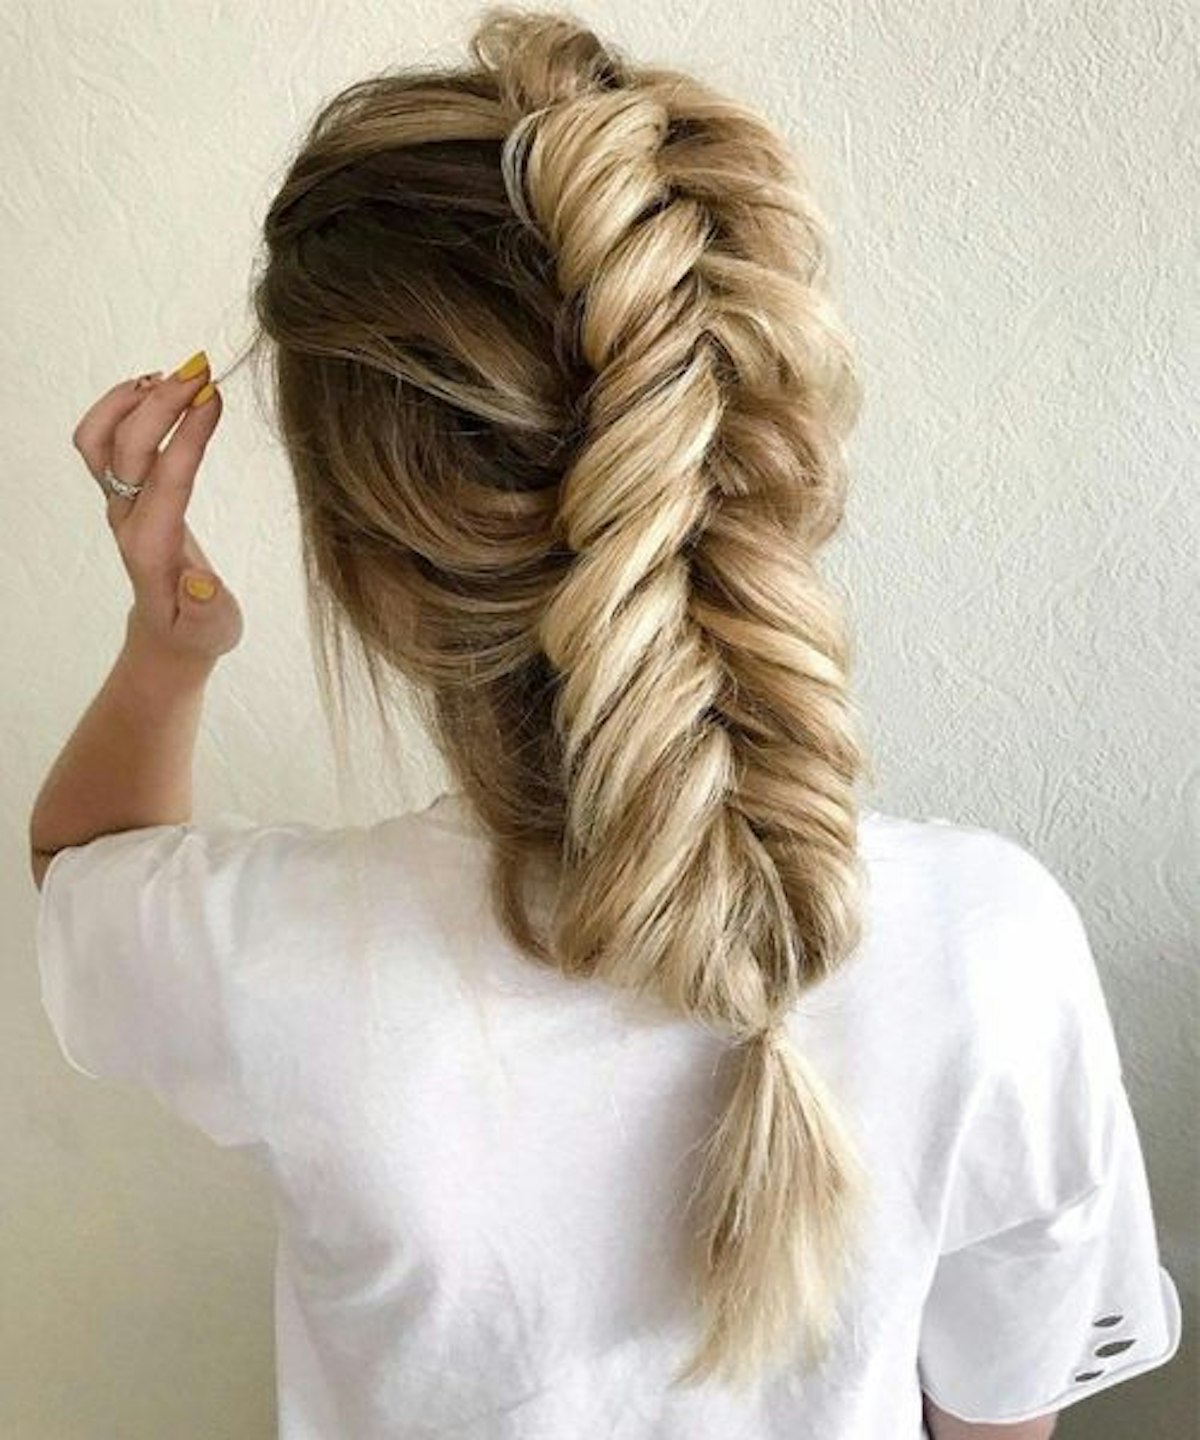 Fishtail Braid Hairstyle: How To, Step-By-Step and Pinterest Inspiration